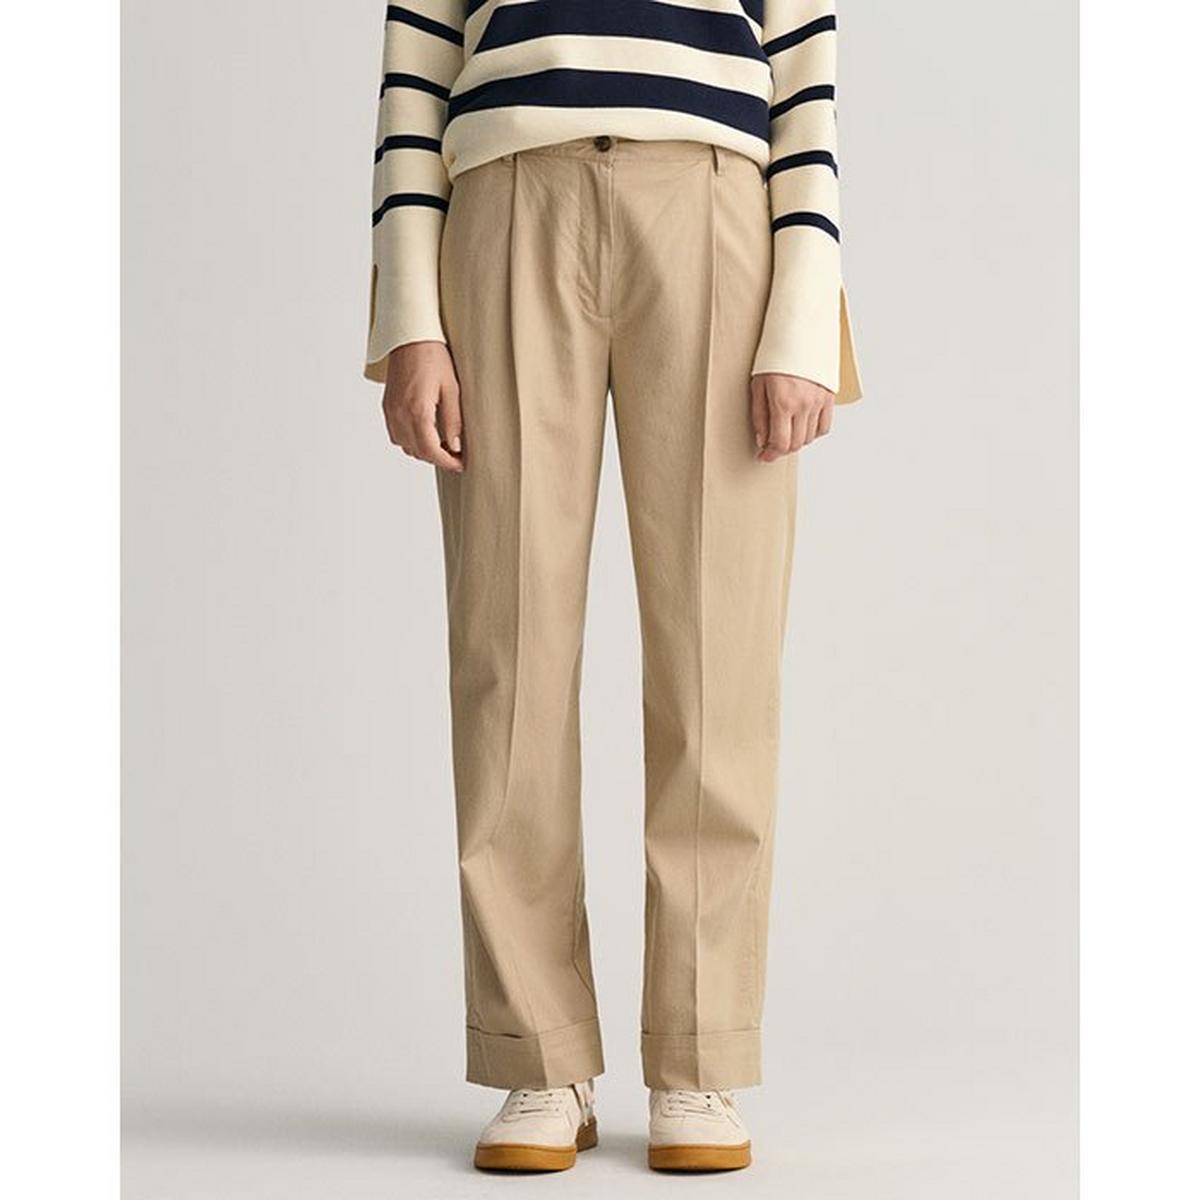 Women's Relaxed Fit Turn-Up Chino Pant